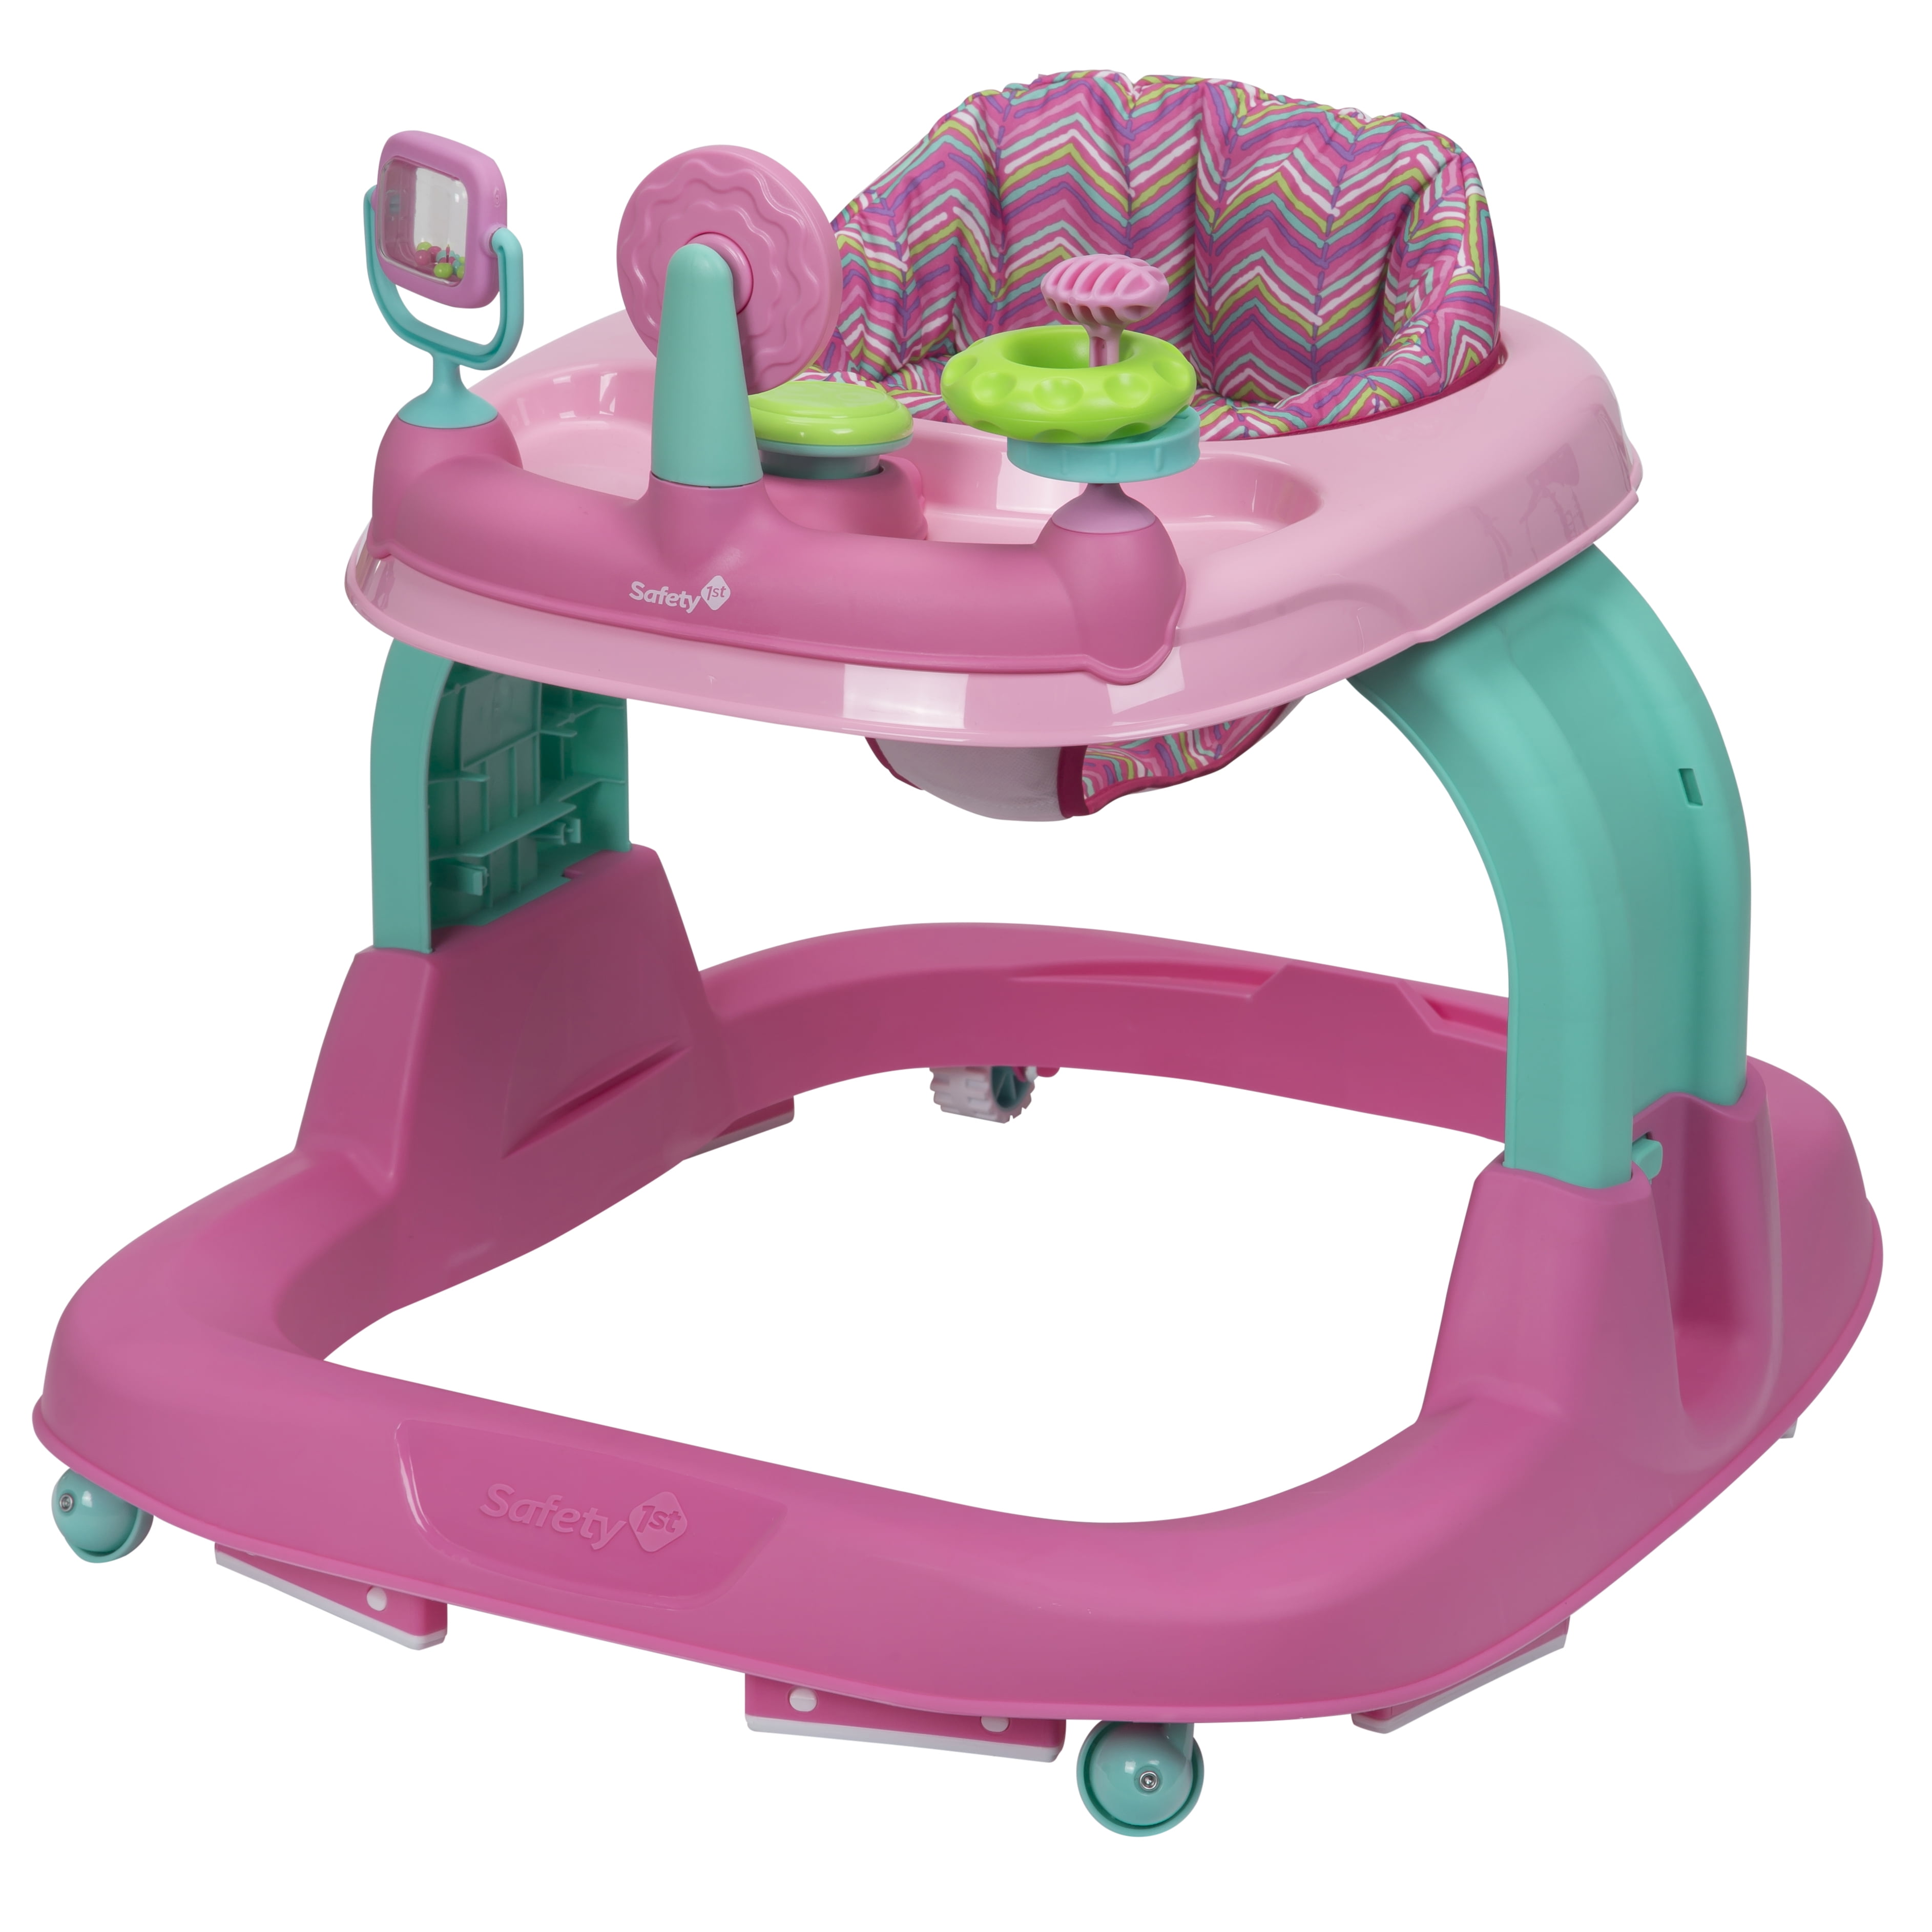 Safety 1st Baby Walker, Buy Now, Flash Sales, 59% OFF, www.chocomuseo.com